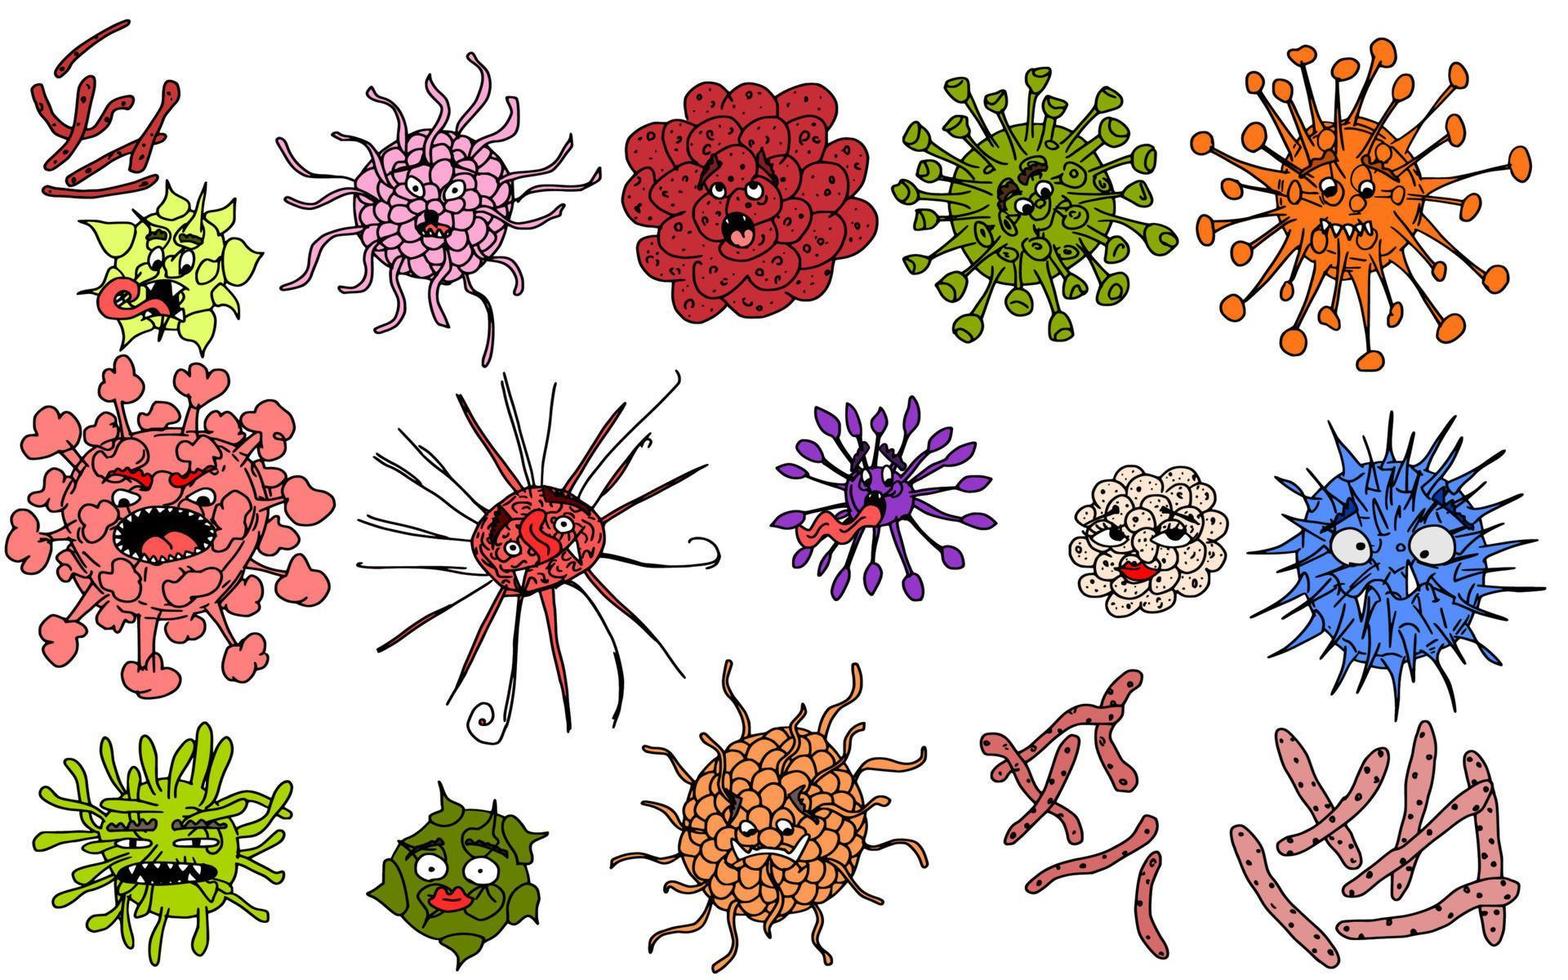 funny viruses doodle sketch characters bright vector